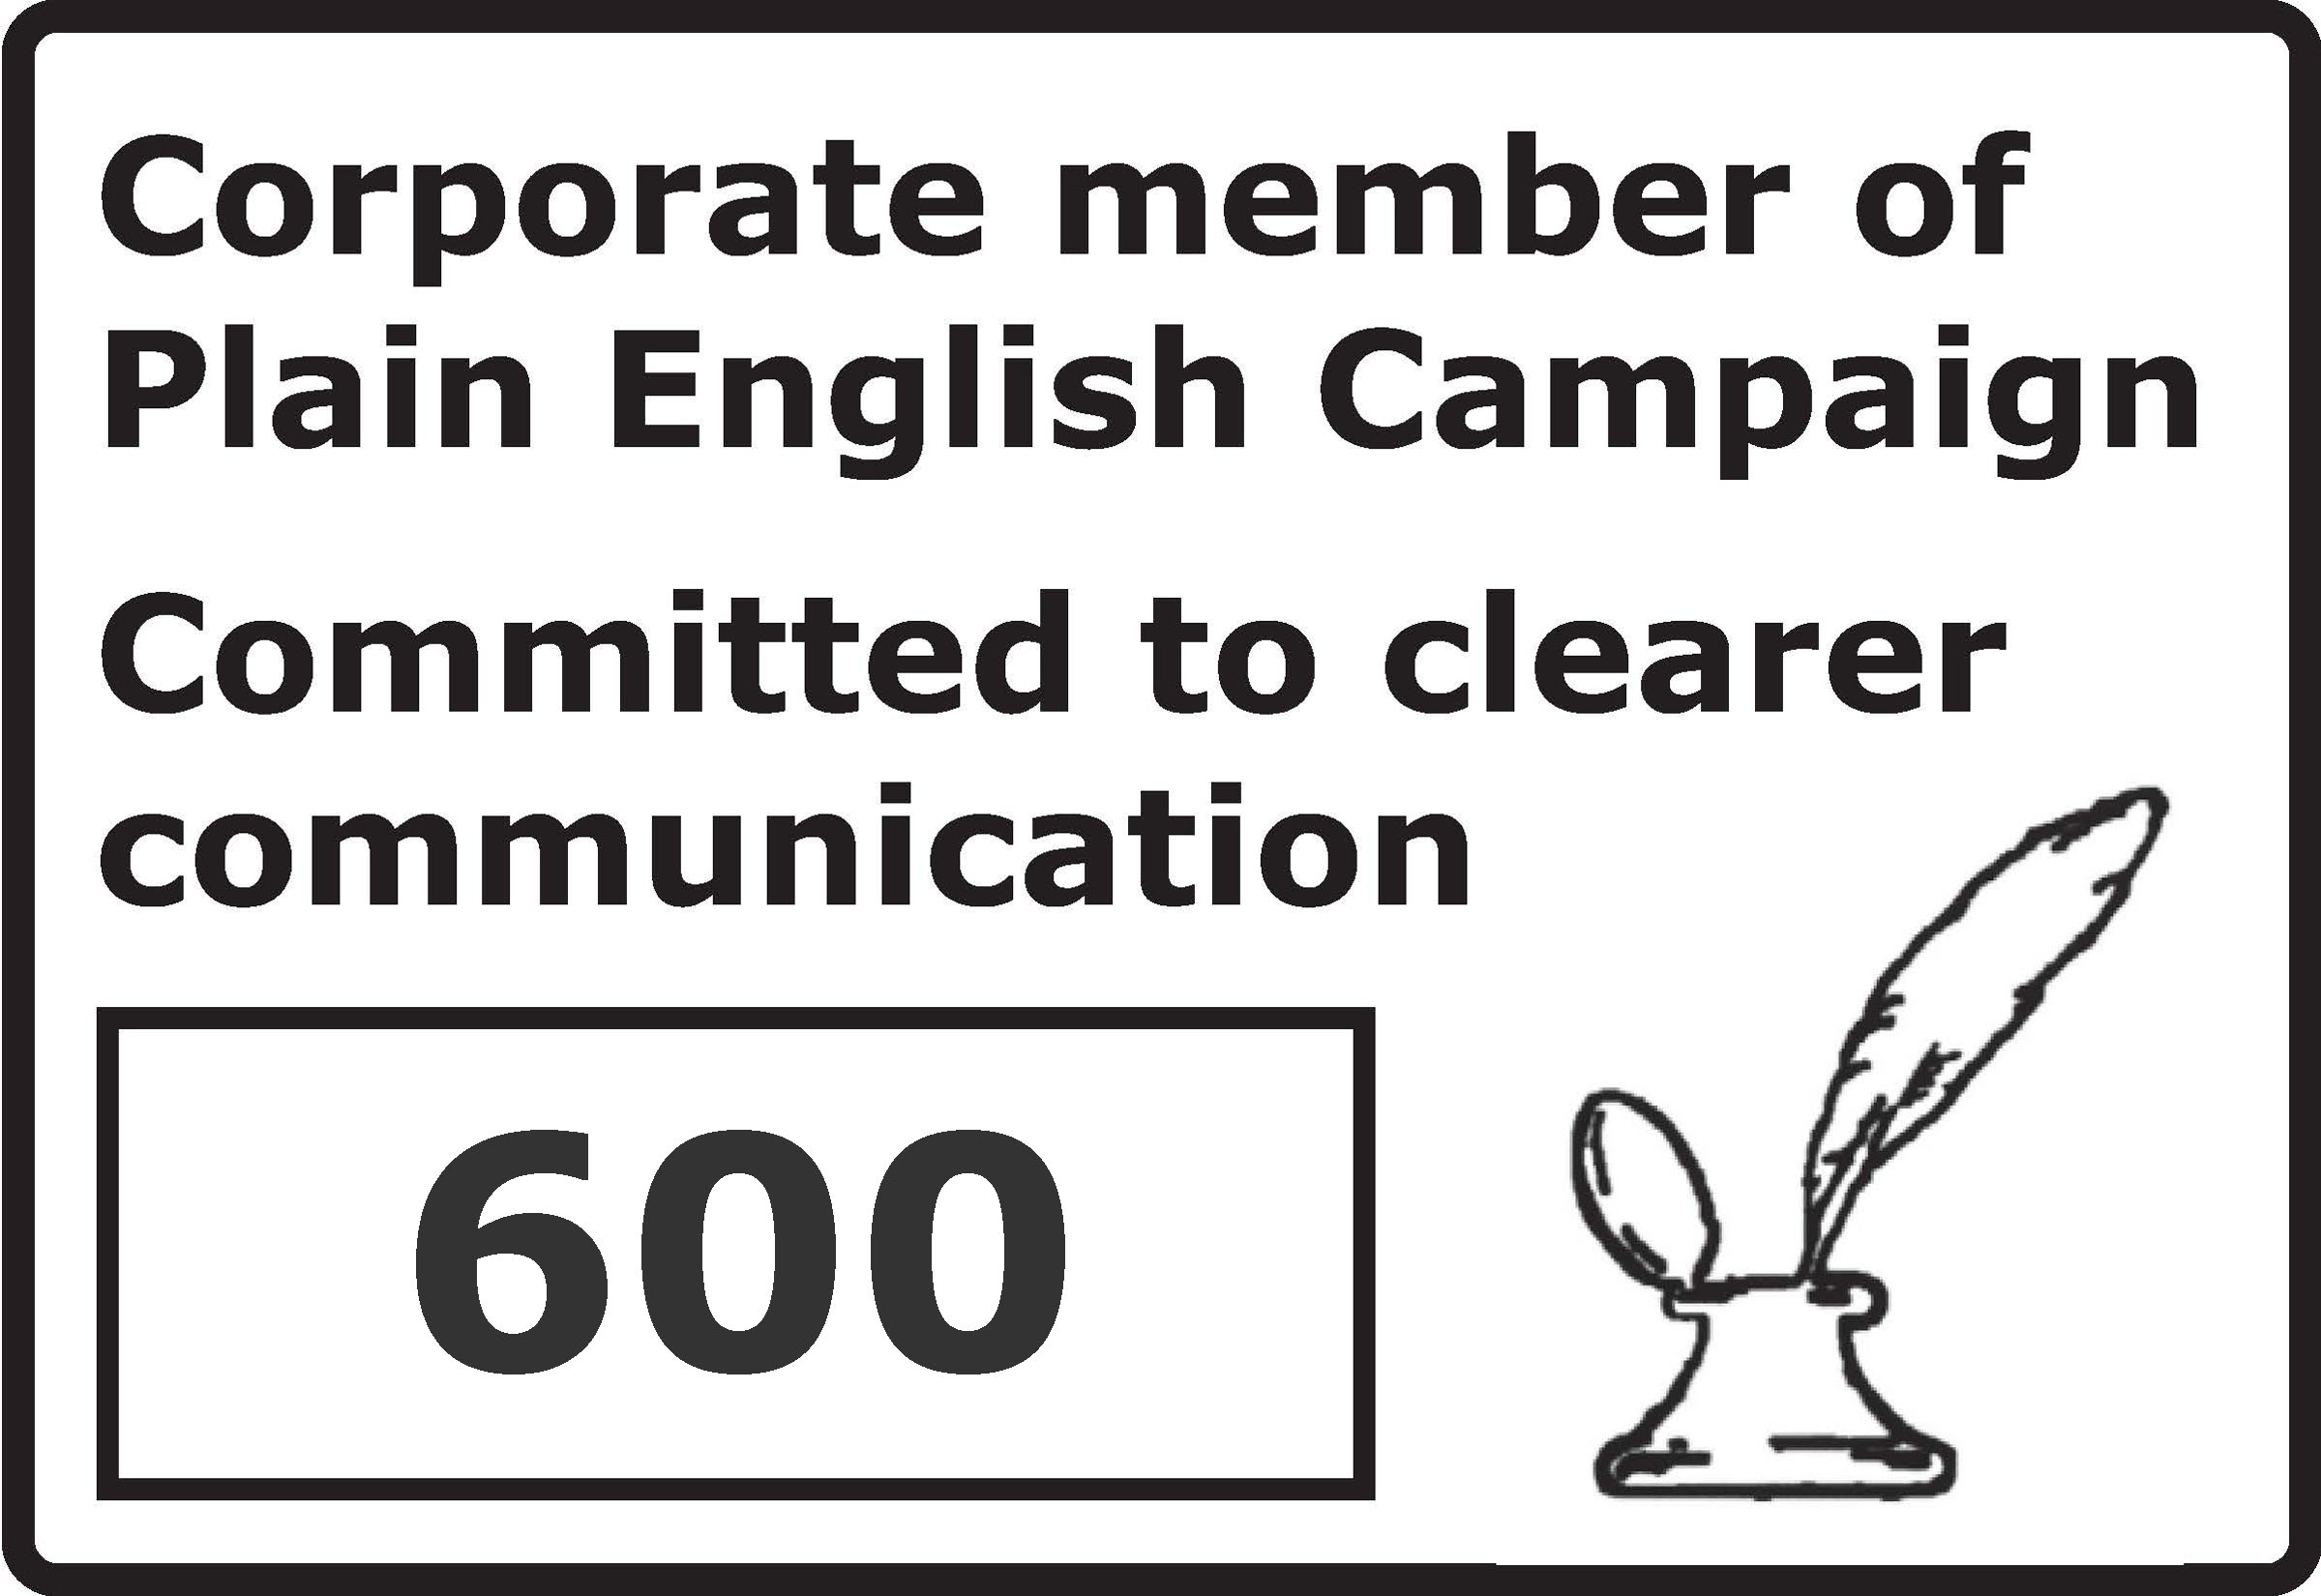 Corporate member of Plain English Campaign - Committed to clearer communication.